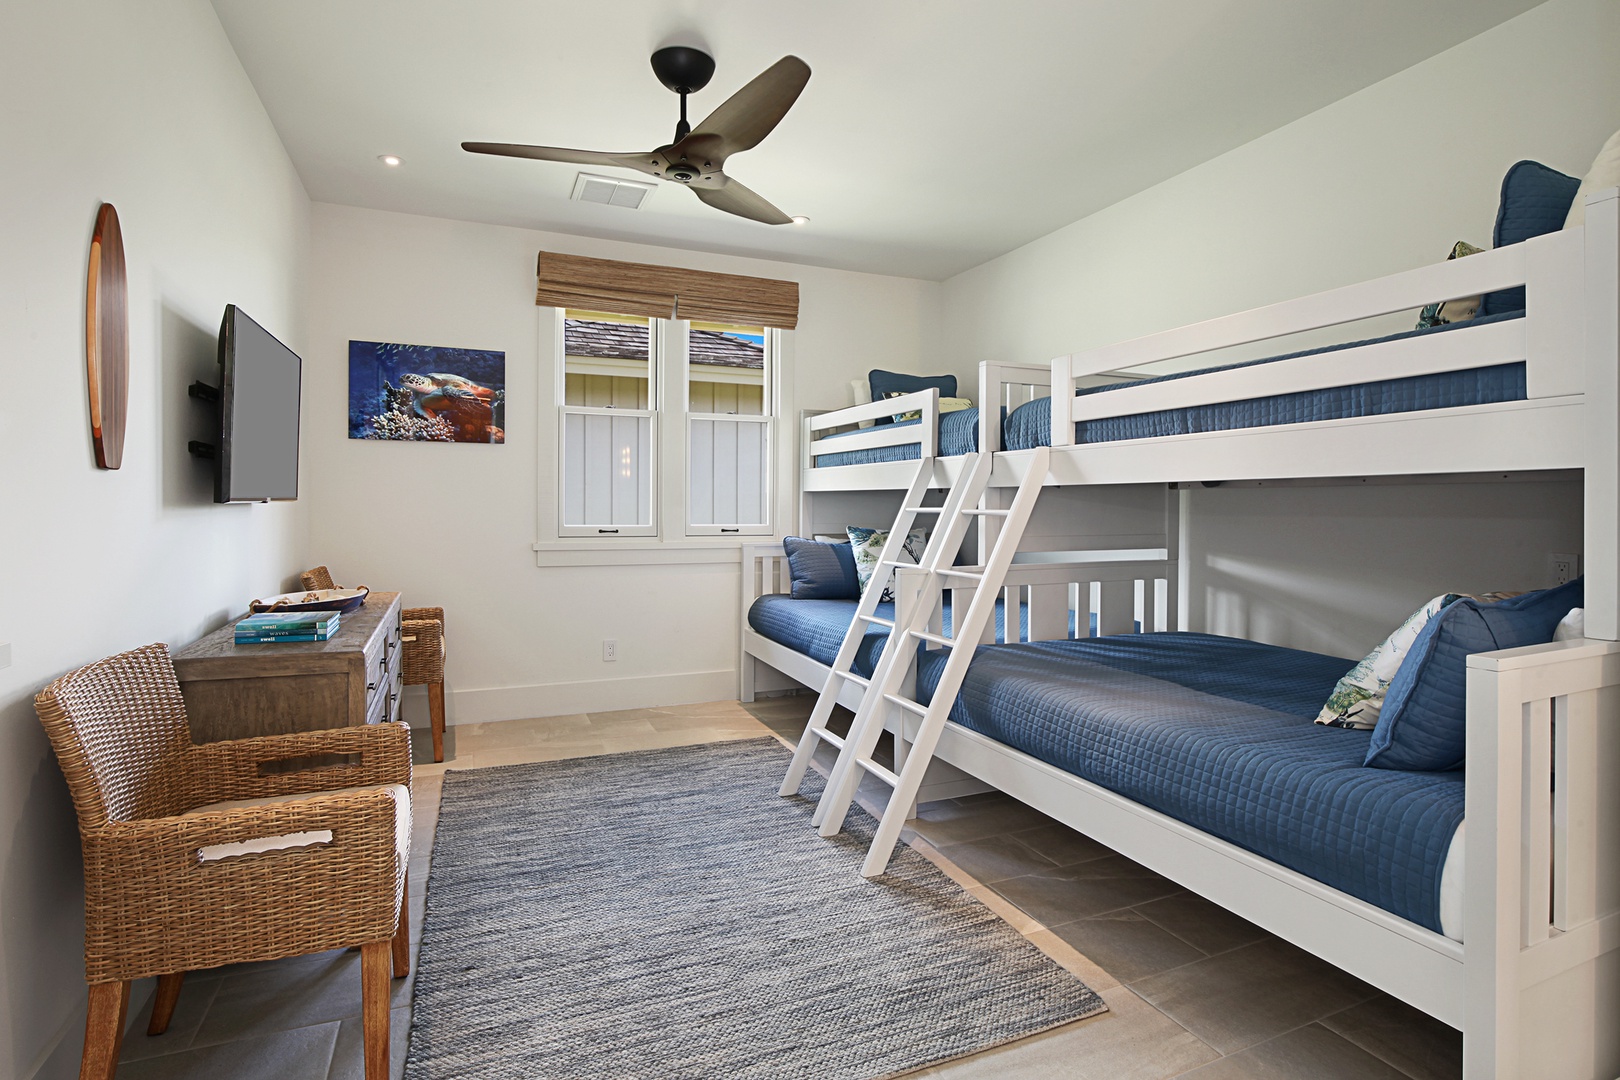 Koloa Vacation Rentals, Hale Mala Ulu - Guest bunk room perfect for little ones. It has 2 Twin-over-Double Bunk Beds, Ensuite Bathroom